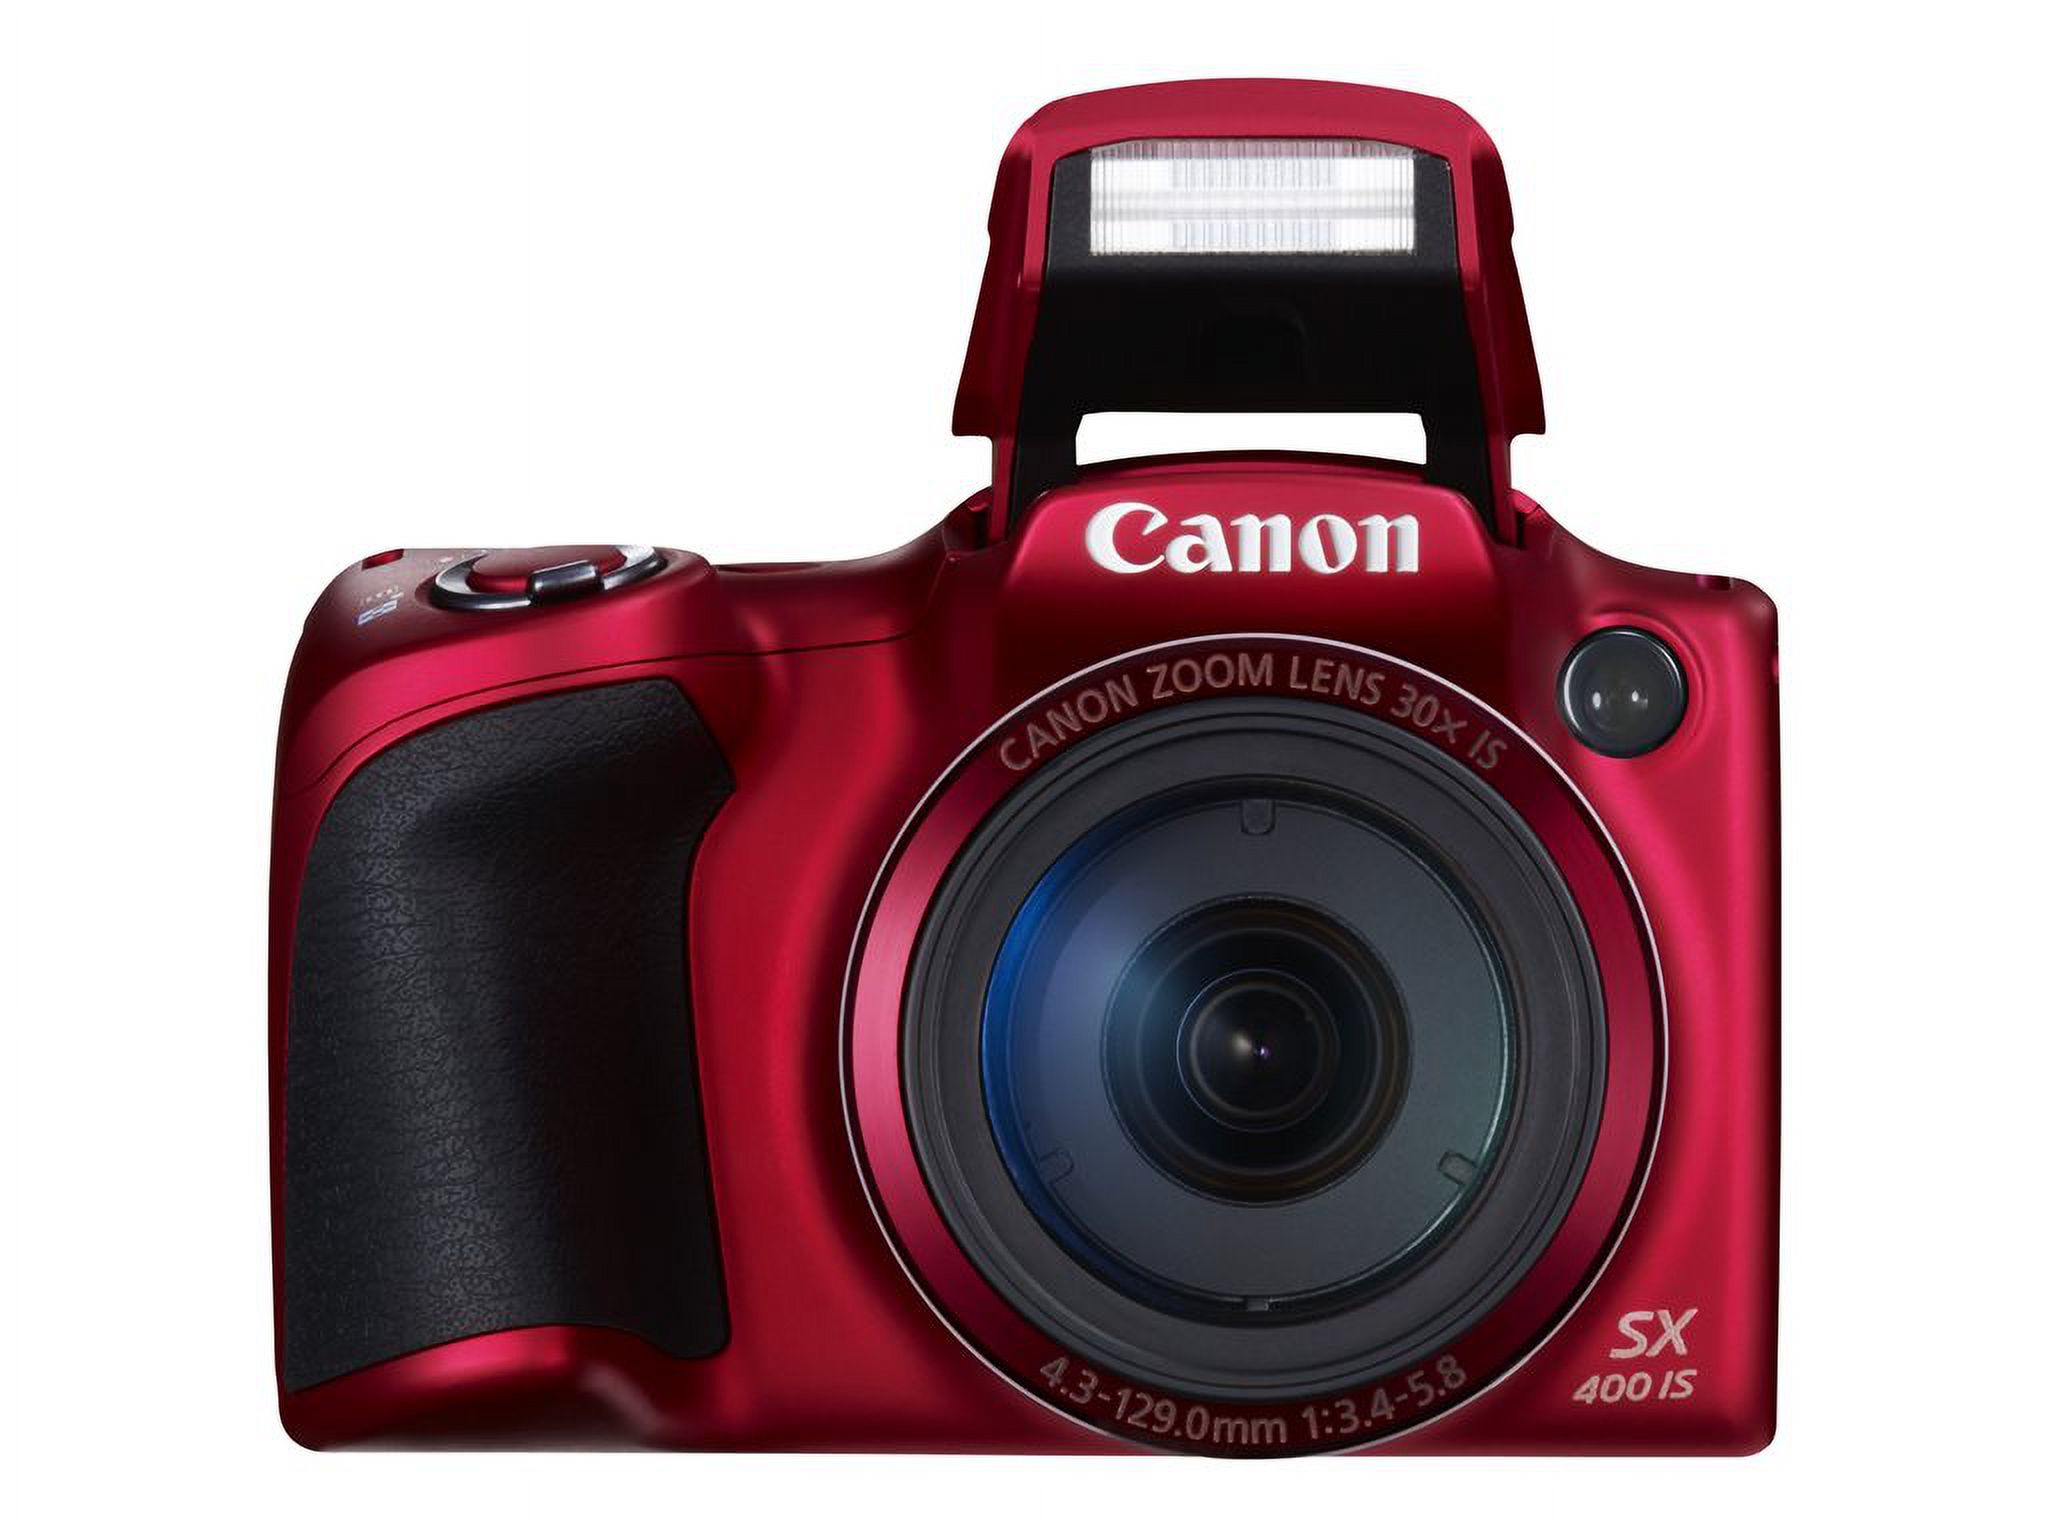 Canon PowerShot SX400 IS - Digital camera - High Definition - compact - 16.0 MP - 30 x optical zoom - red - image 2 of 72